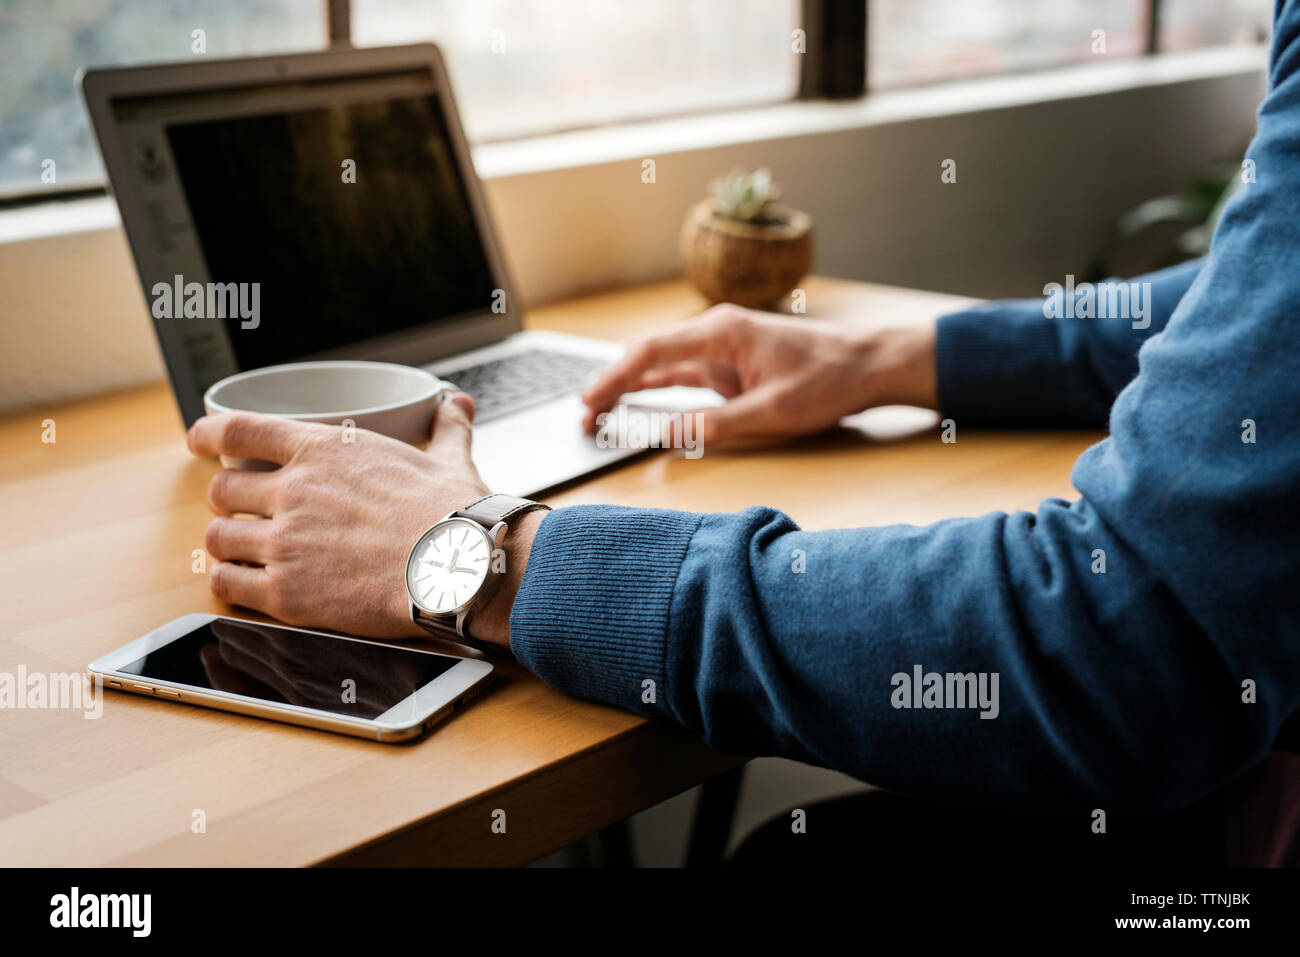 Cropped image of man using laptop on table in cafe Stock Photo